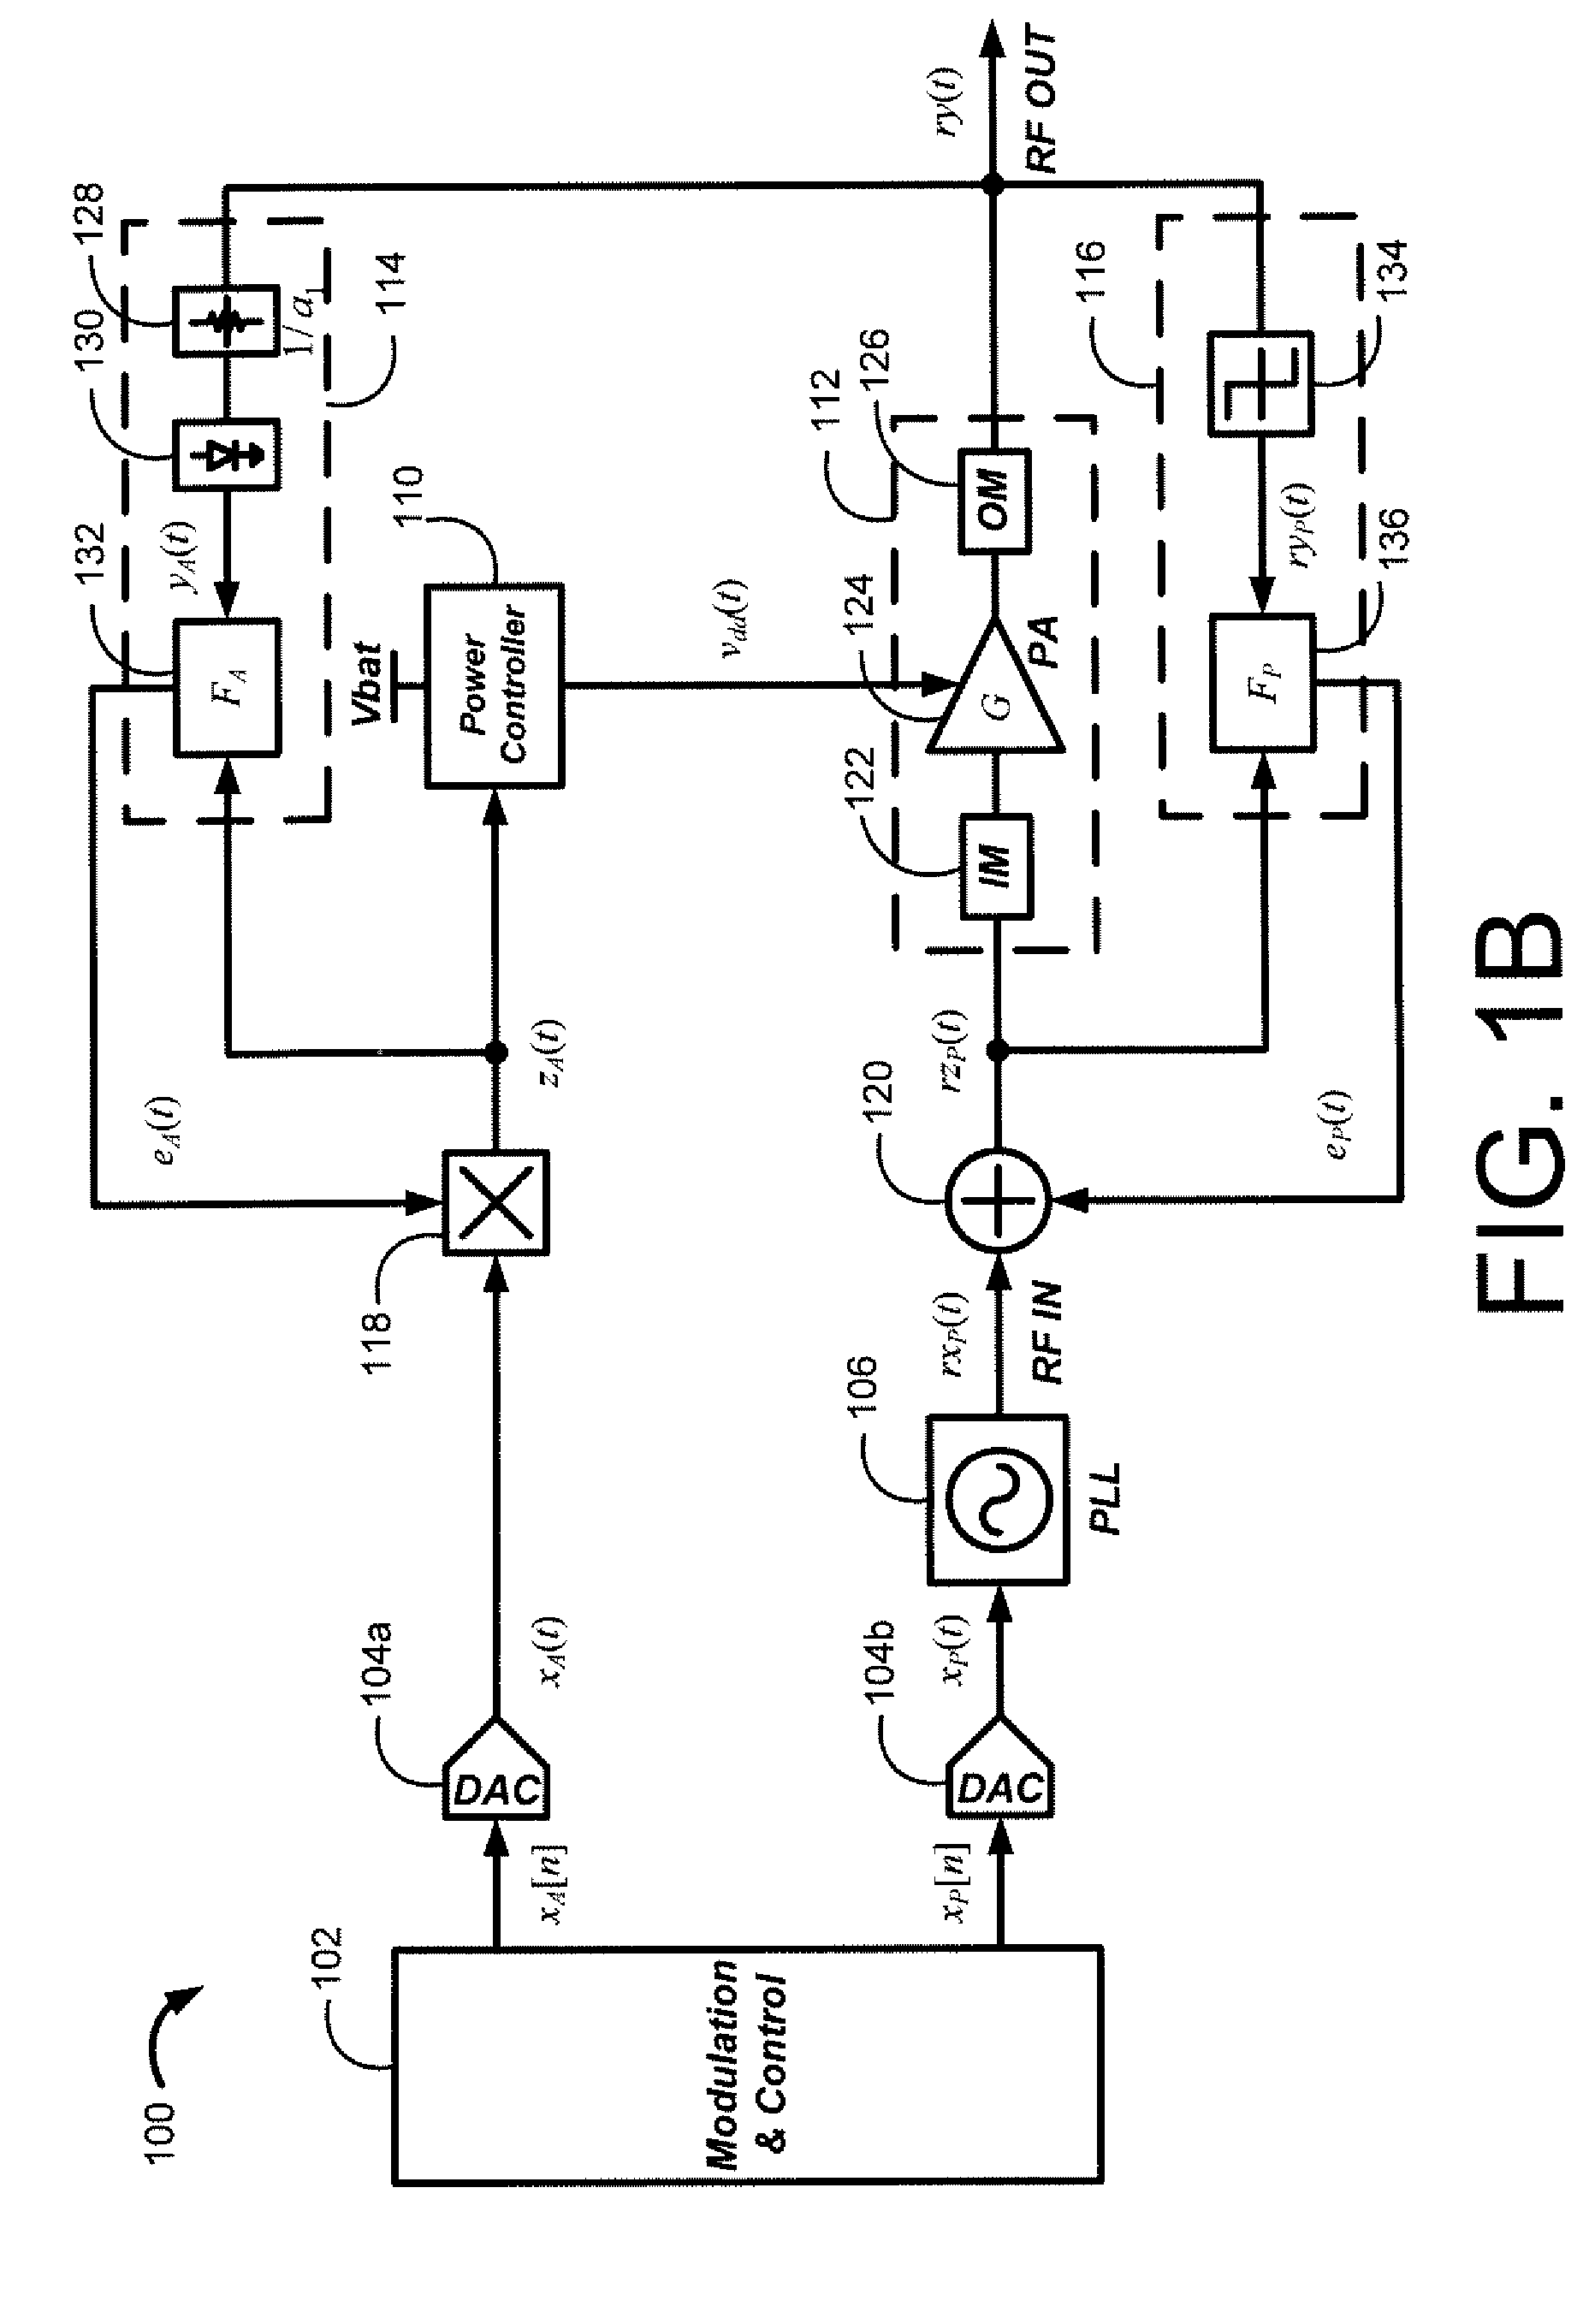 Systems, methods, and apparatuses for linear polar transmitters